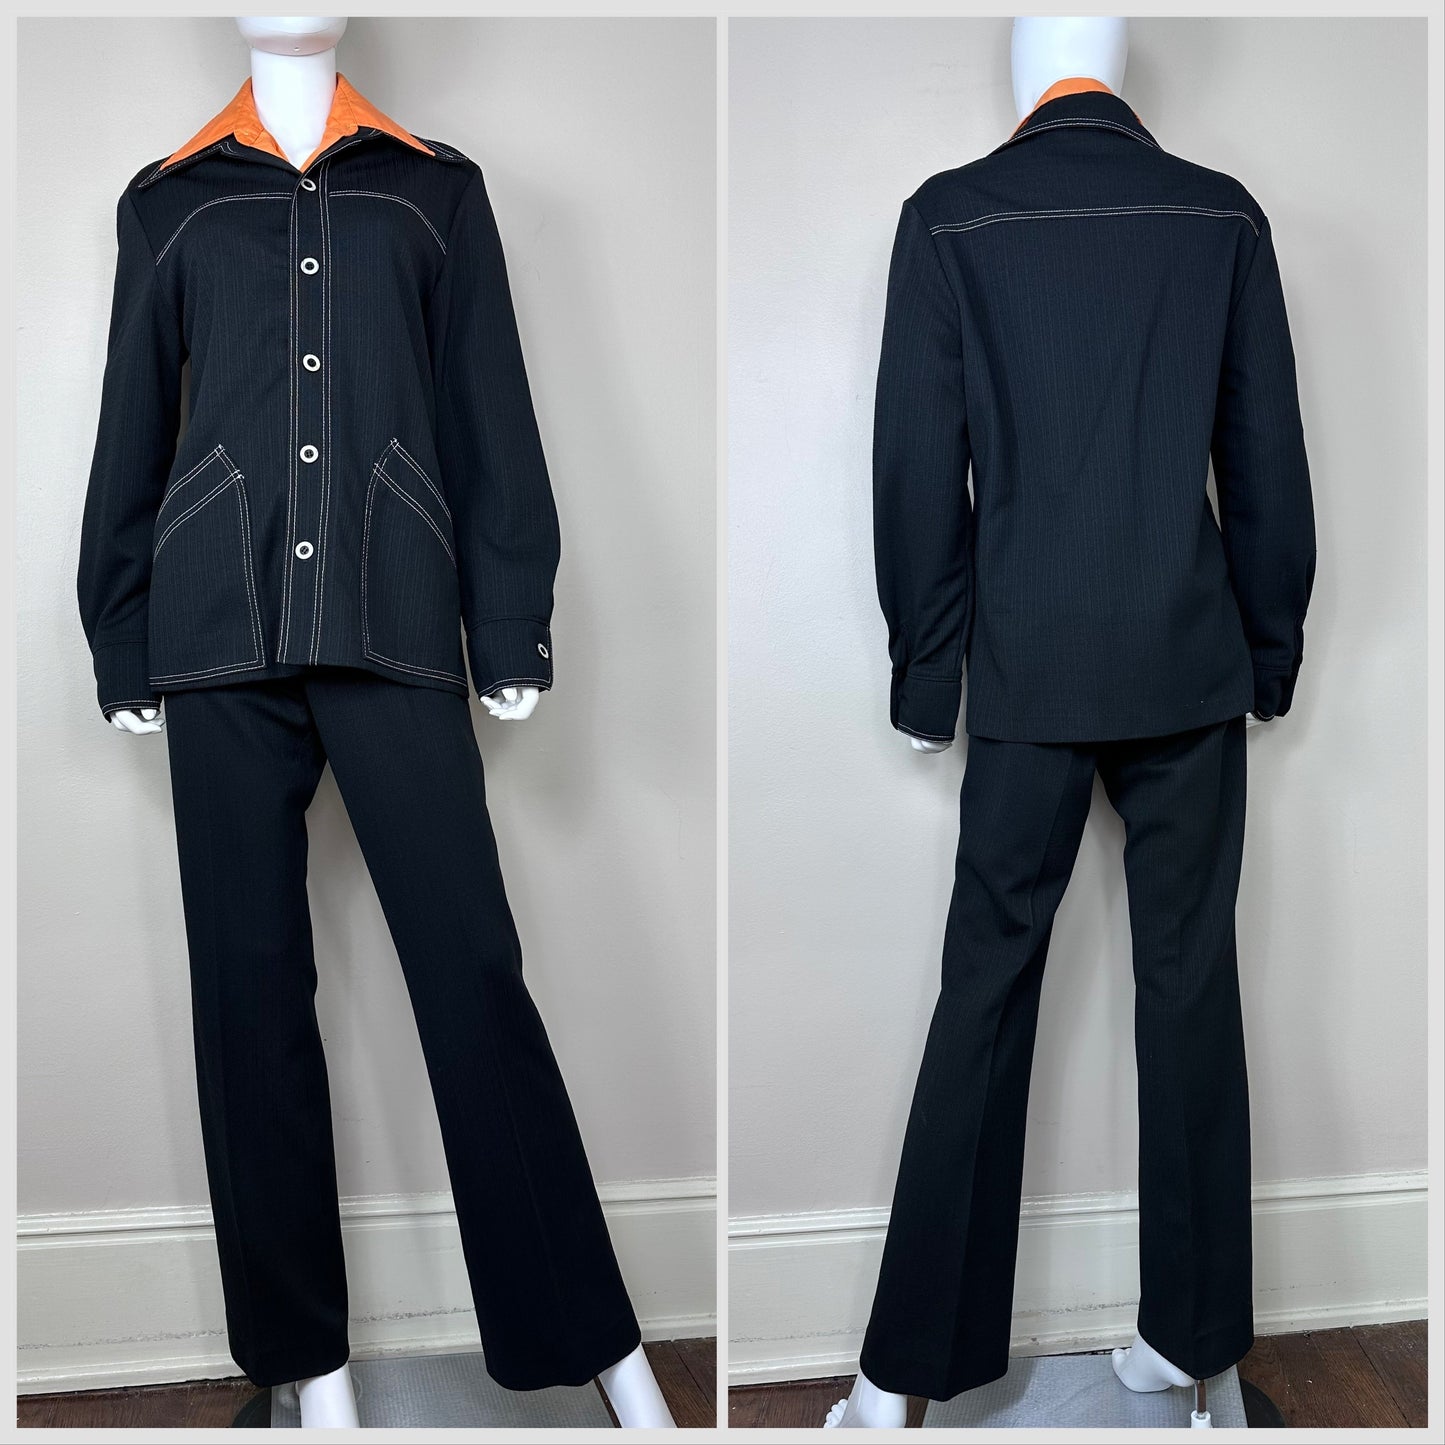 1970s Black Leisure Suit, Kings Road Sears The Men’s Store Size S/M, Jacket and Pants